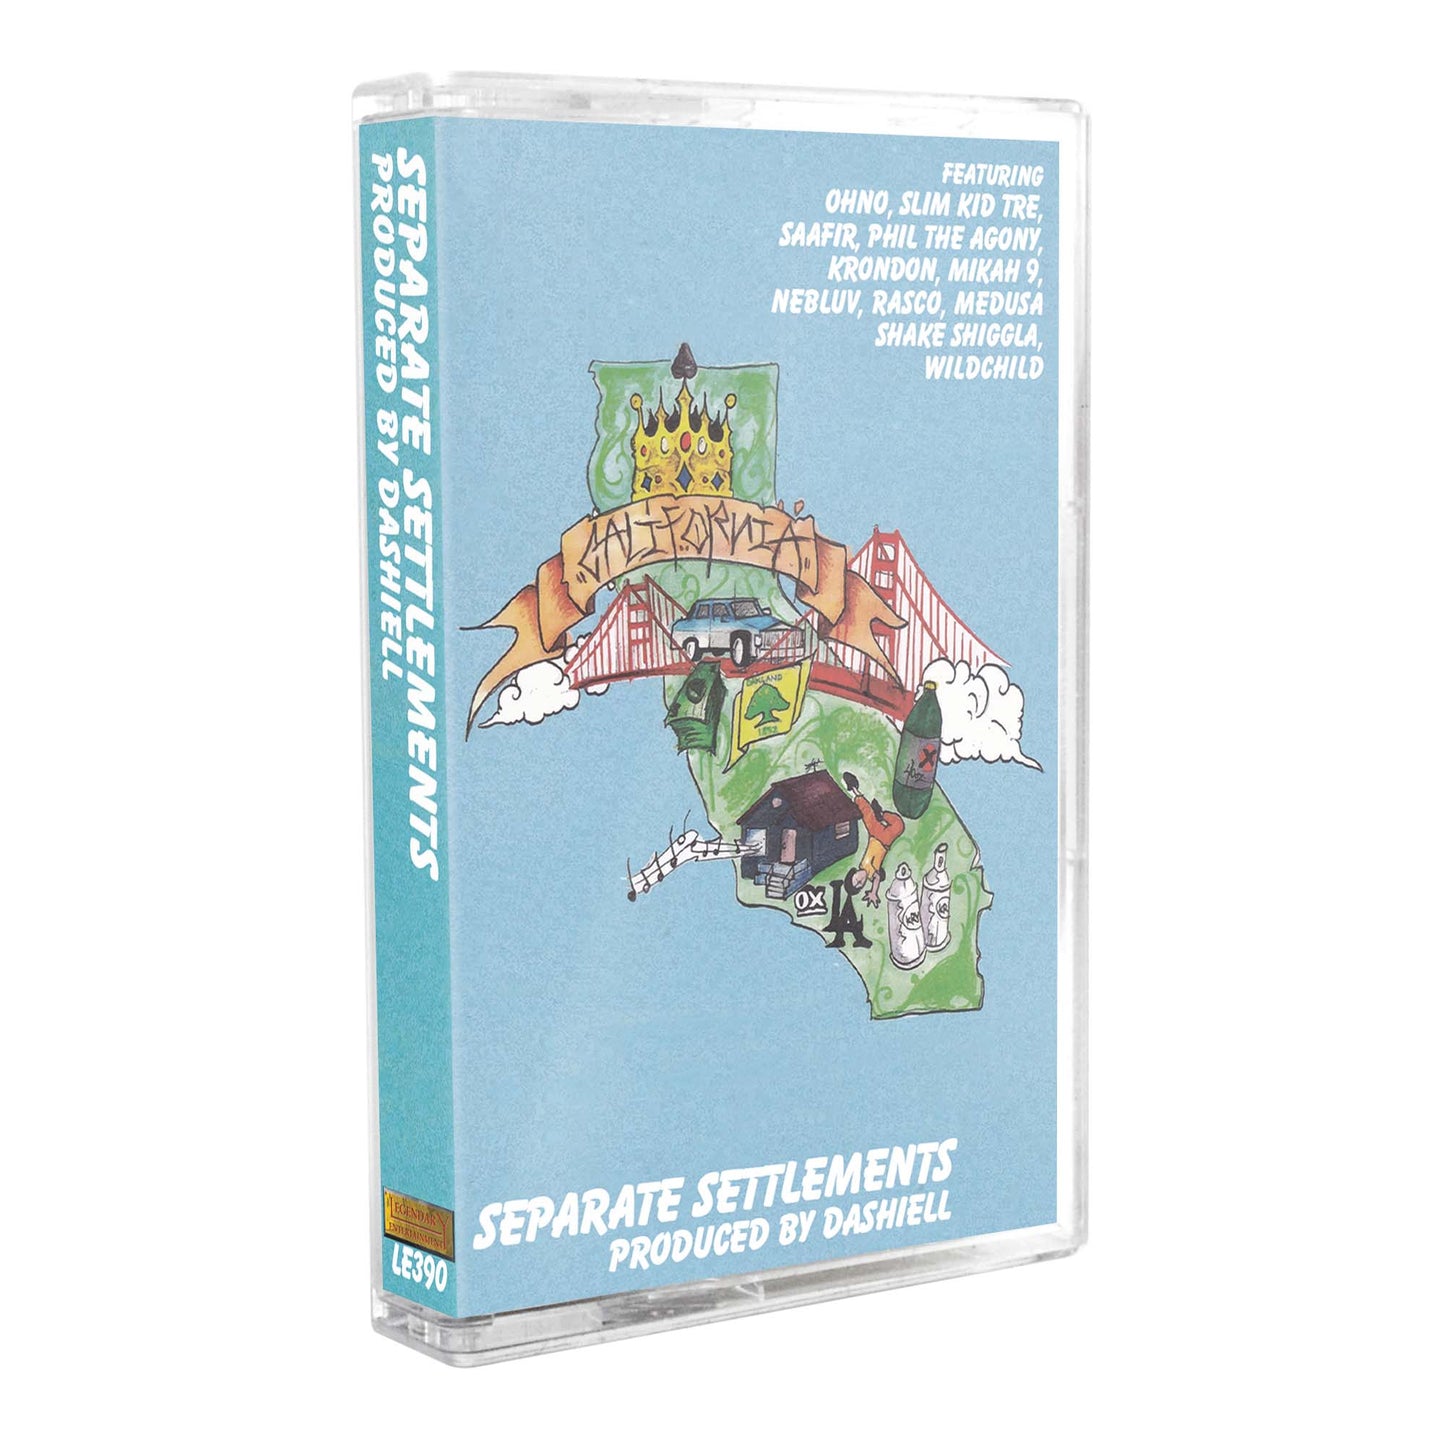 Dashiell - "Separate Settlements" Limited Edition Cassette Tape